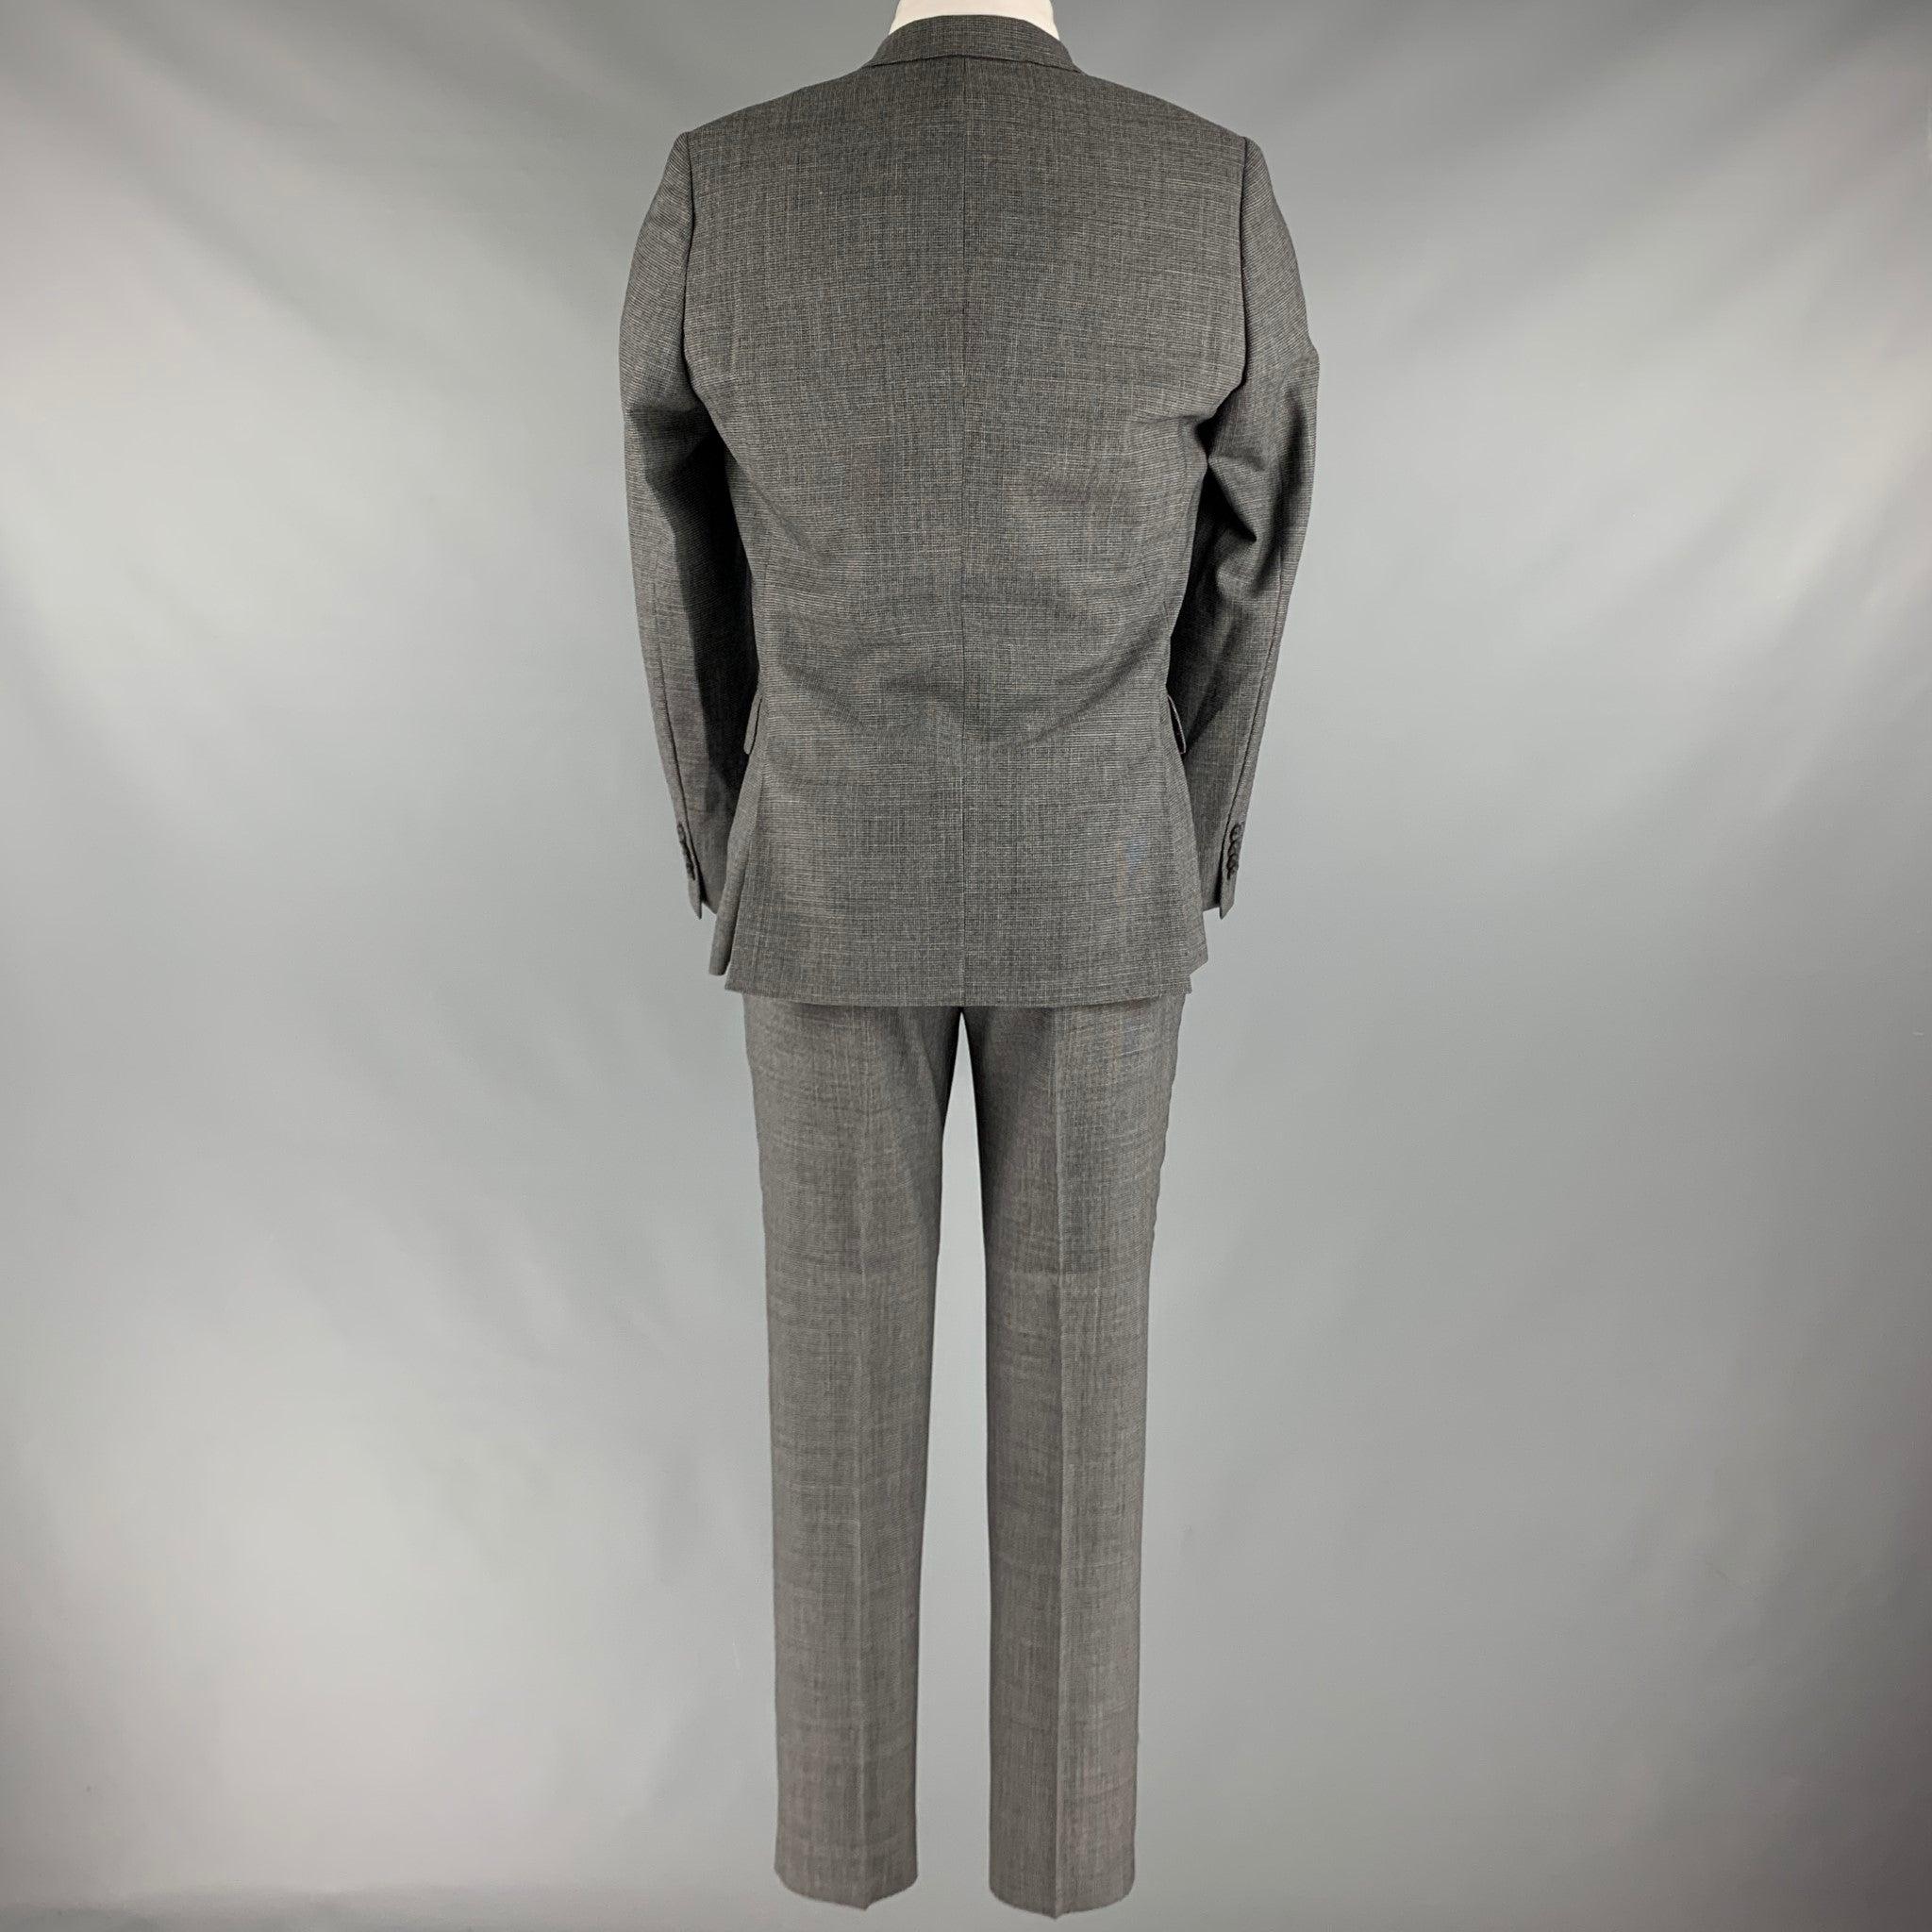 PAUL SMITH Chest Size 38 Grey Black Basketweave Wool Suit In Good Condition For Sale In San Francisco, CA